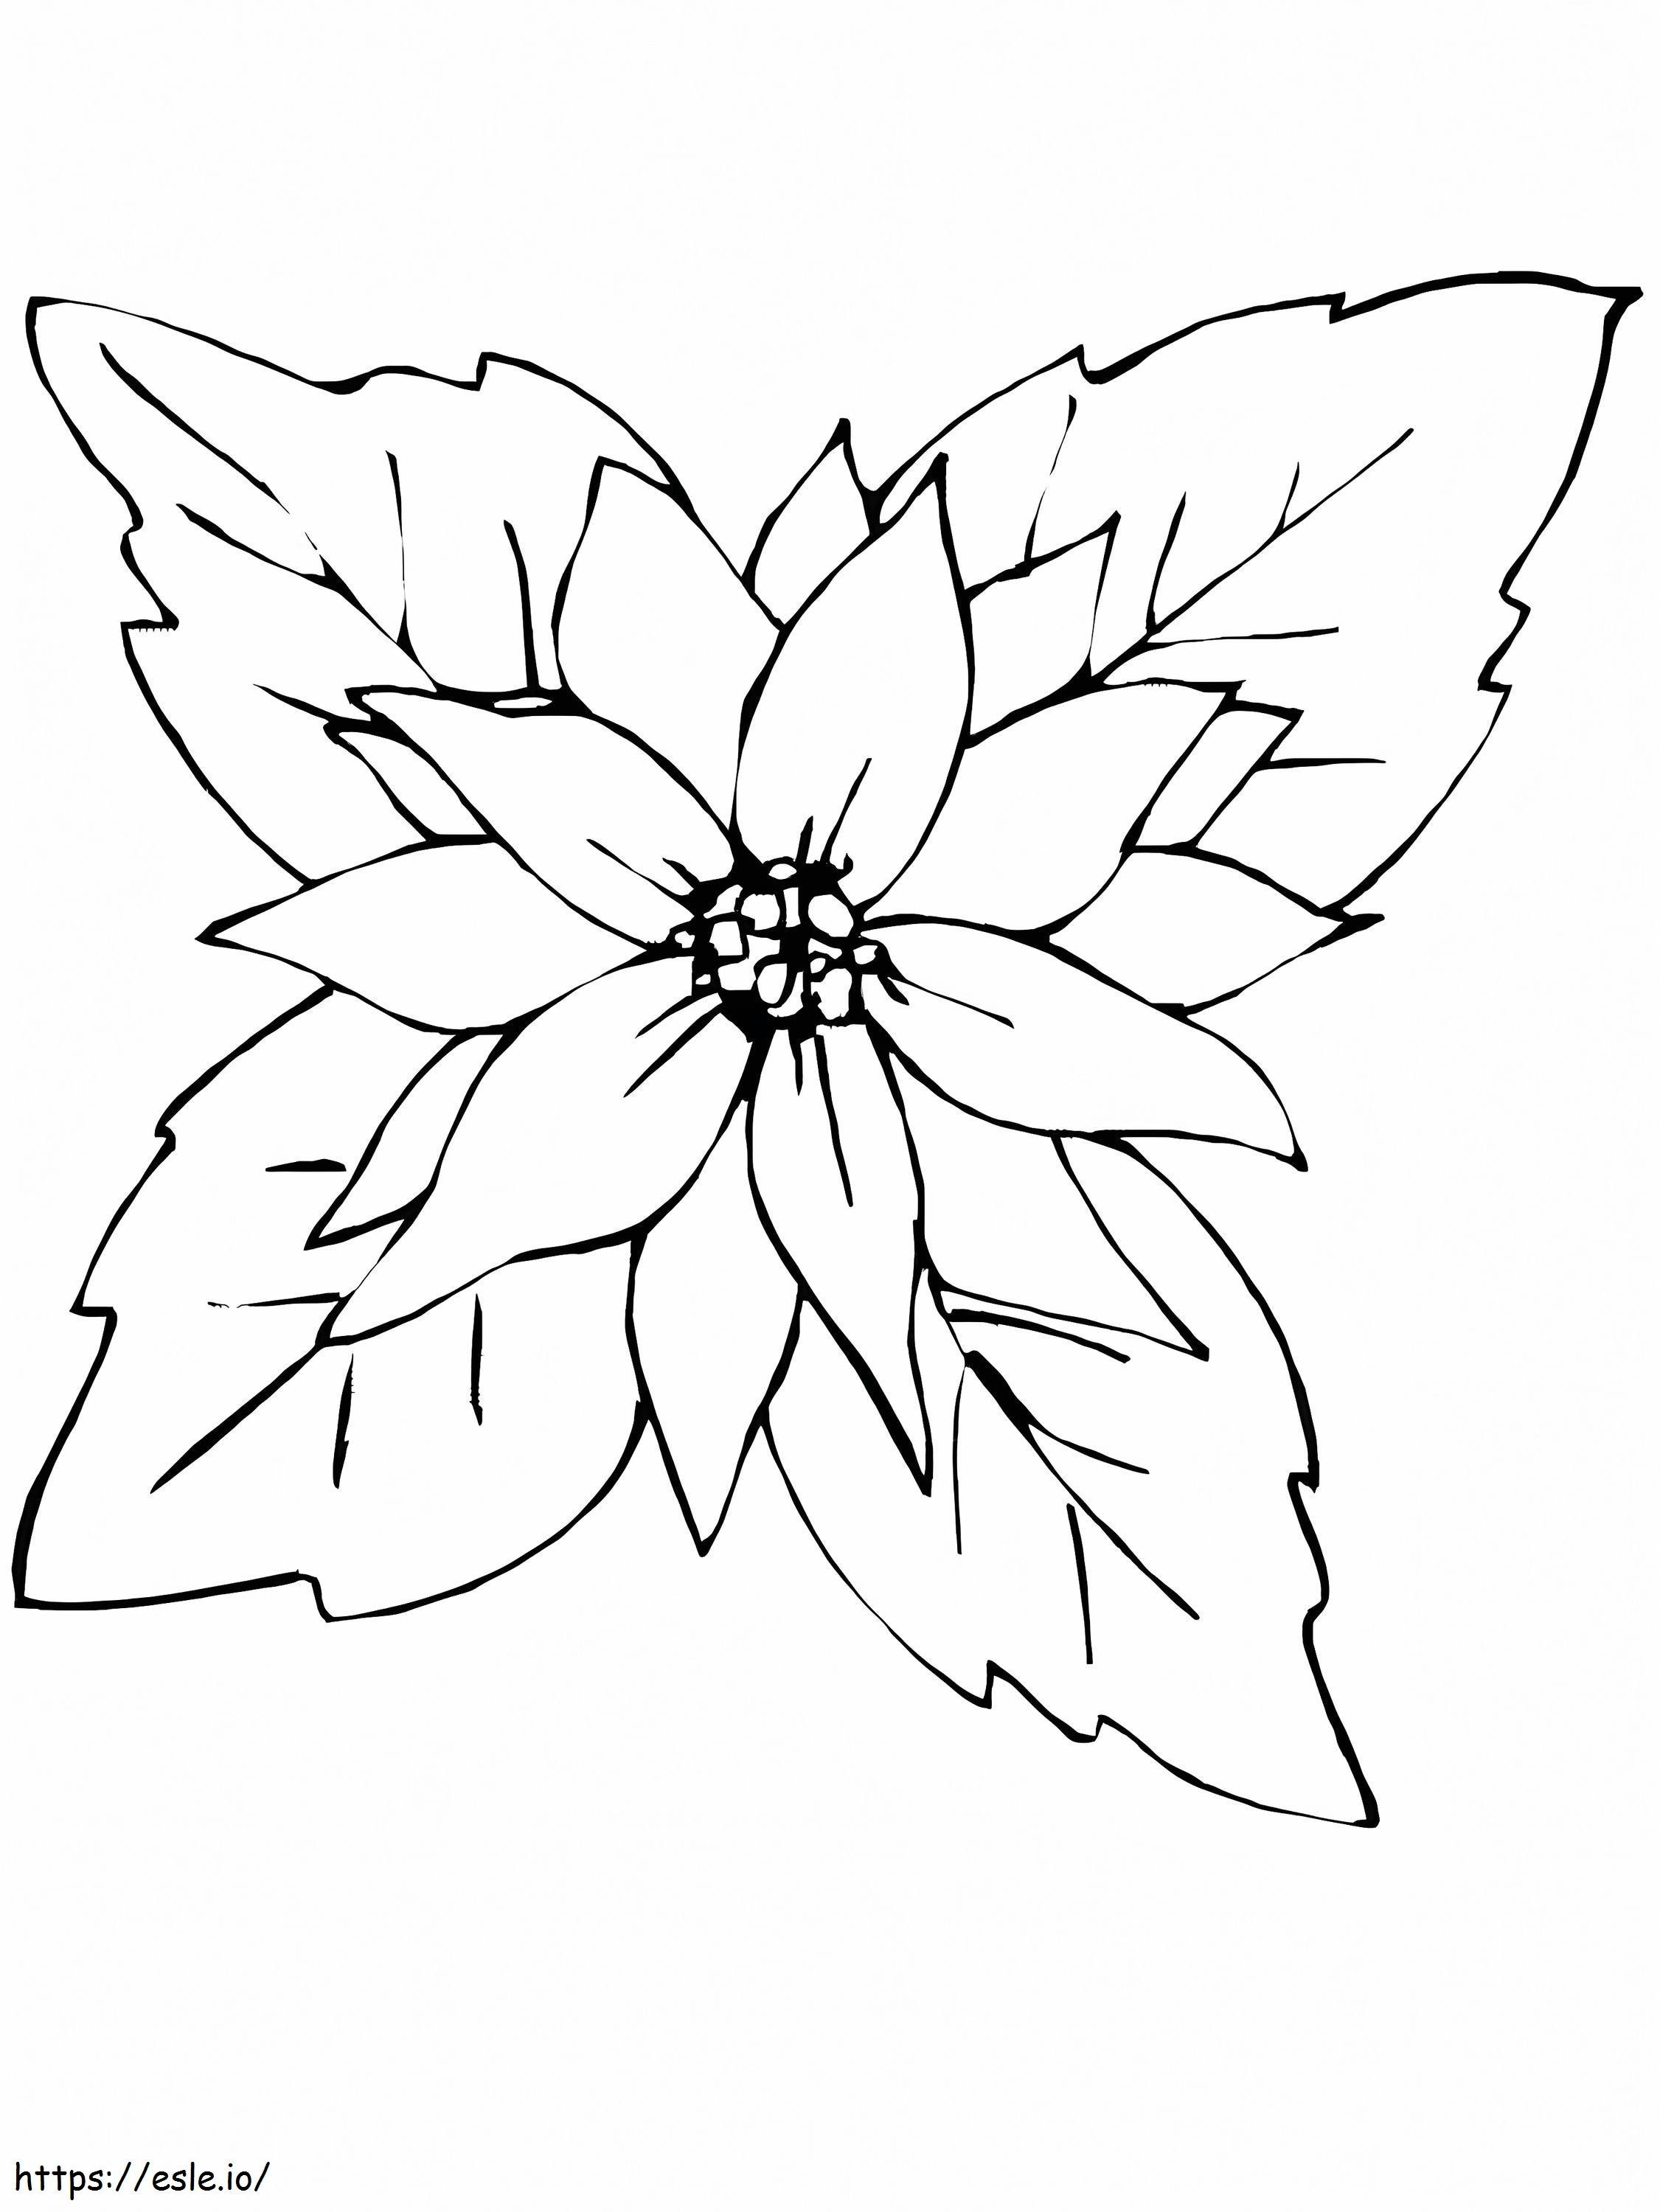 Poinsettia Roja coloring page